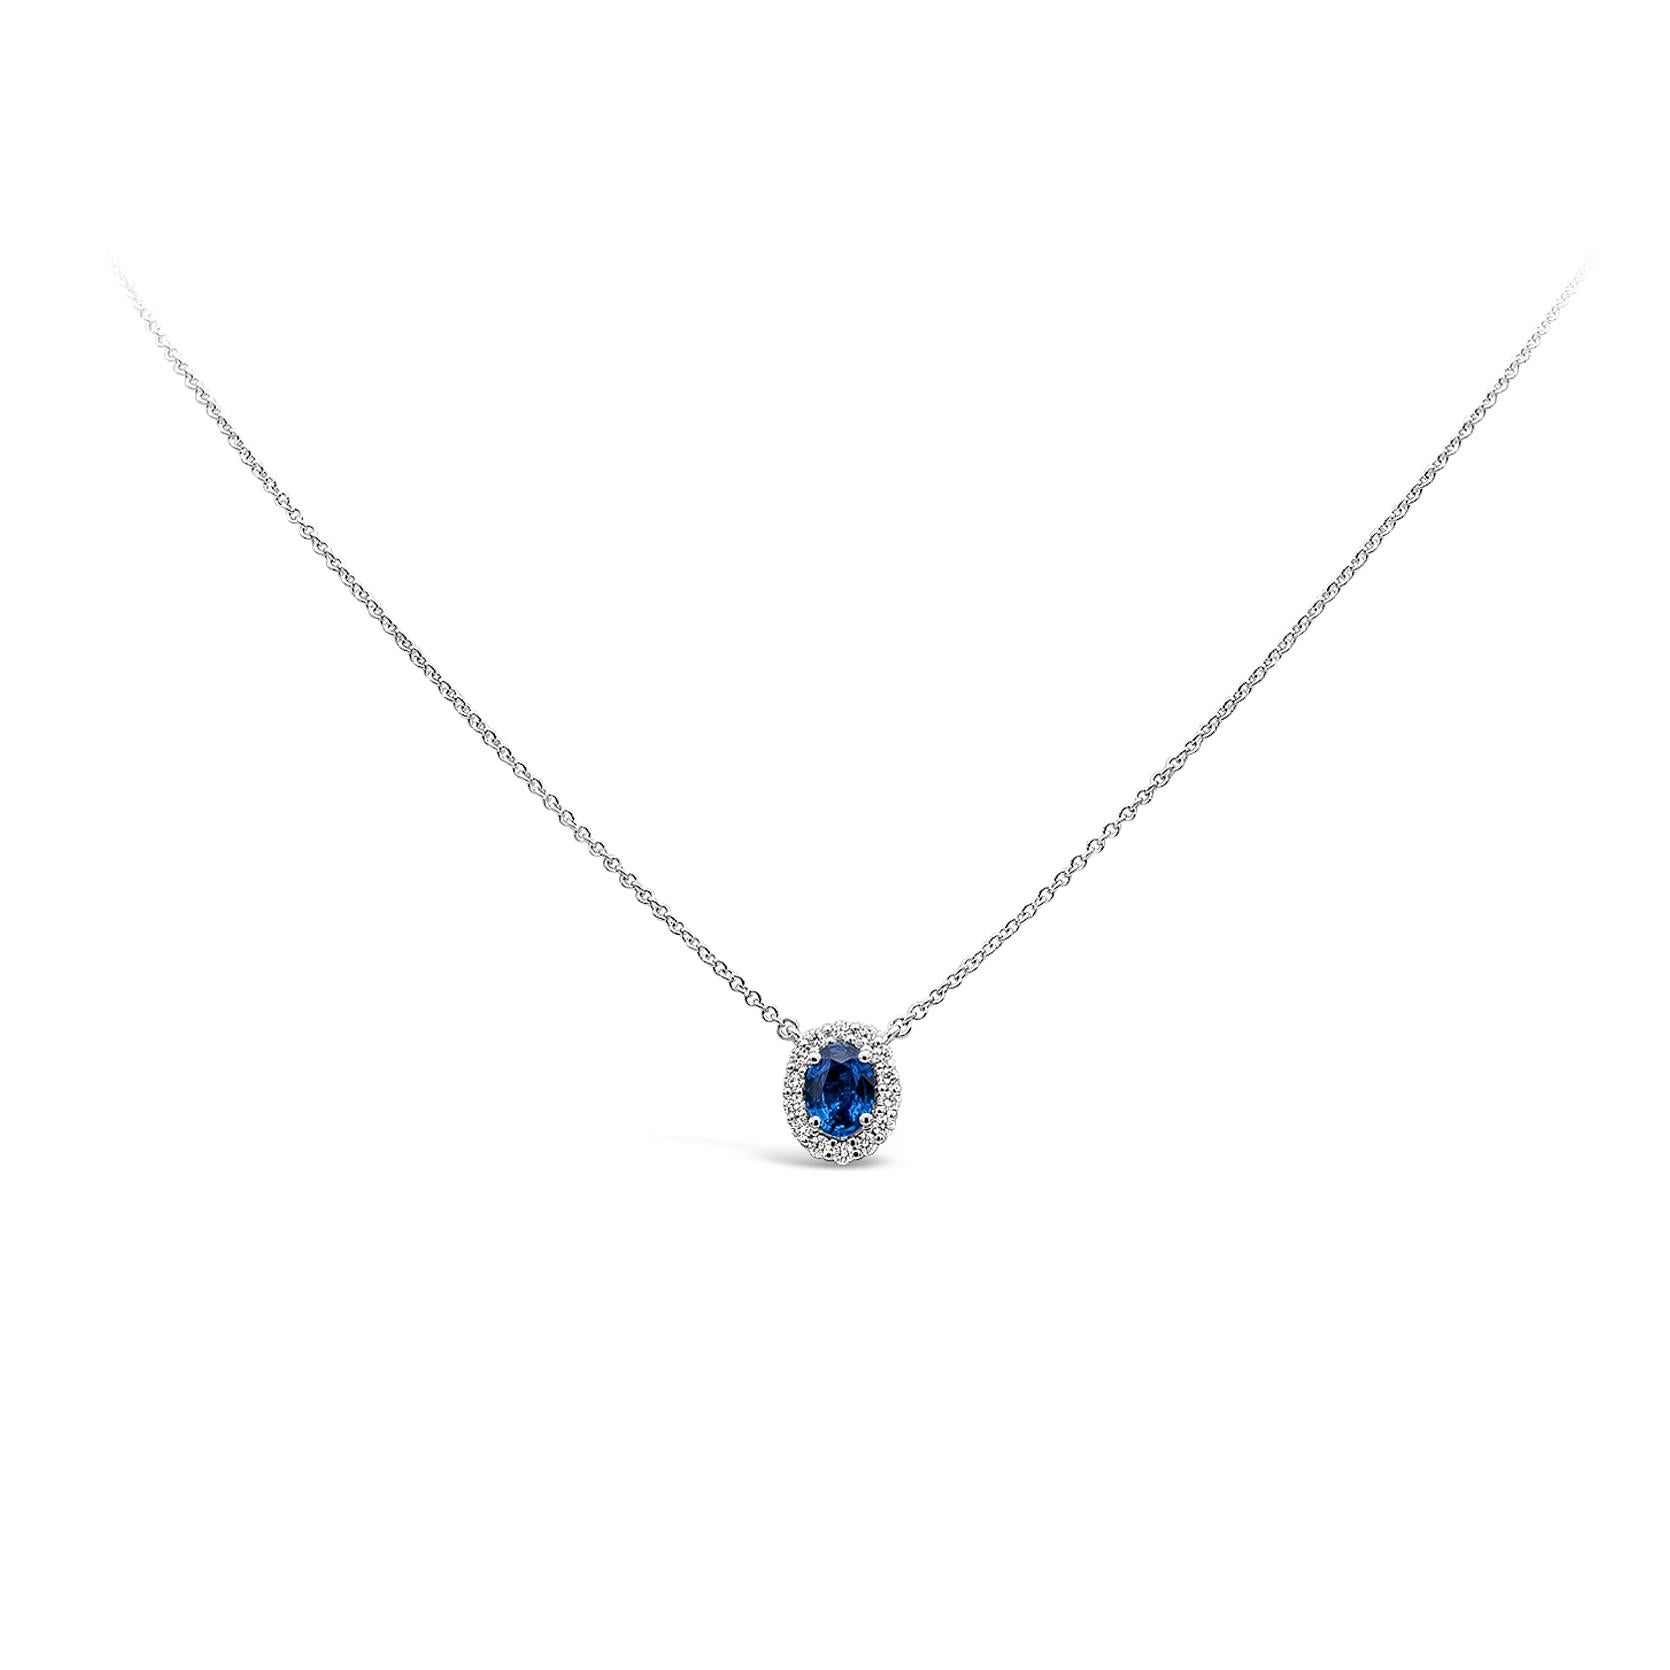 A simple and timeless piece of jewelry showcasing a 0.73 carat oval cut blue sapphire, surrounding by a single row of brilliant round diamonds weighing 0.23 carats total, G color and SI1 in clarity. Suspended on a 18 inches adjustable white gold